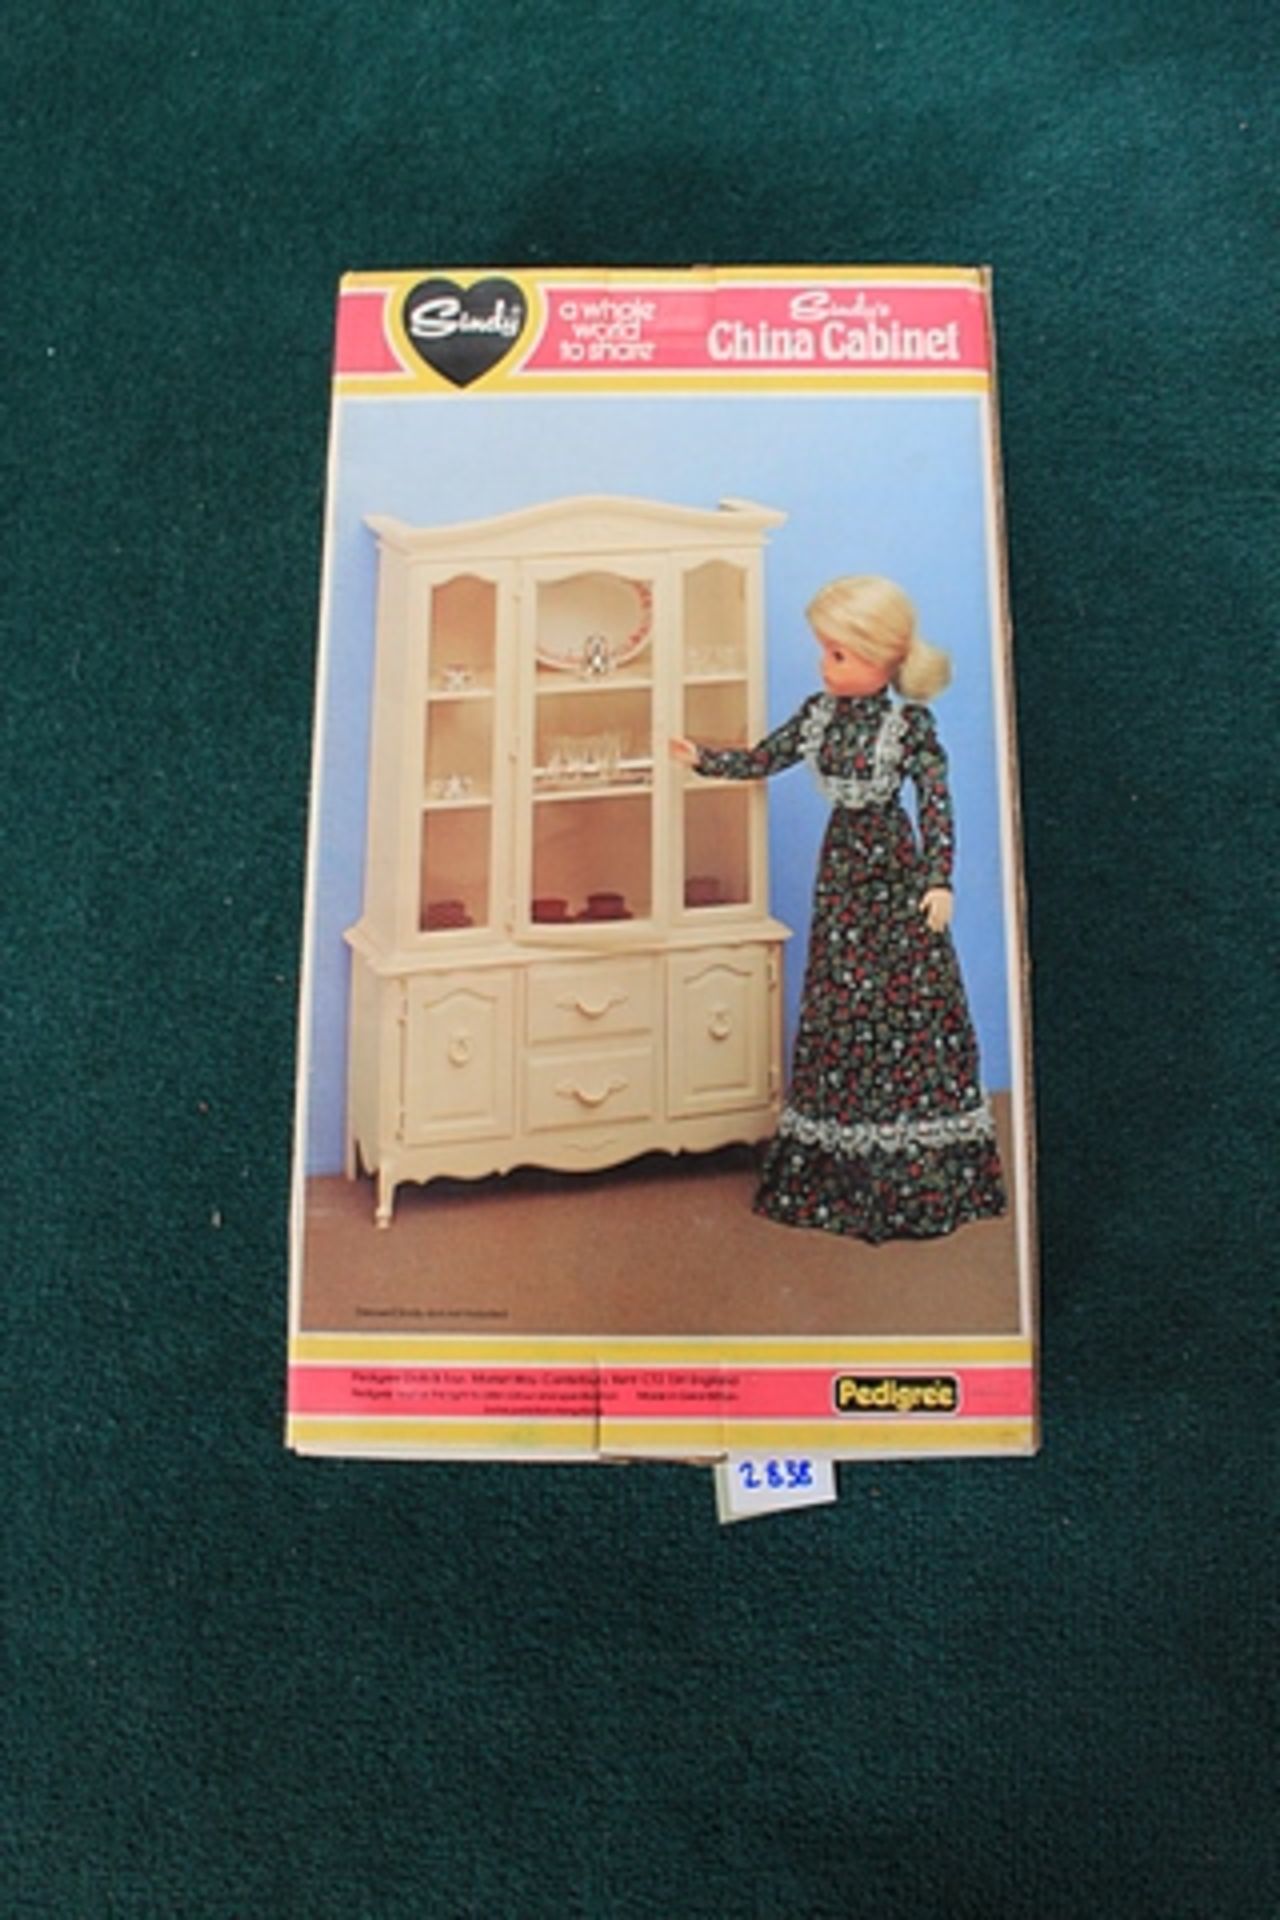 Pedigree (UK) #44583 Vintage 1978 Sindy Doll China Cabinet Complete With Box